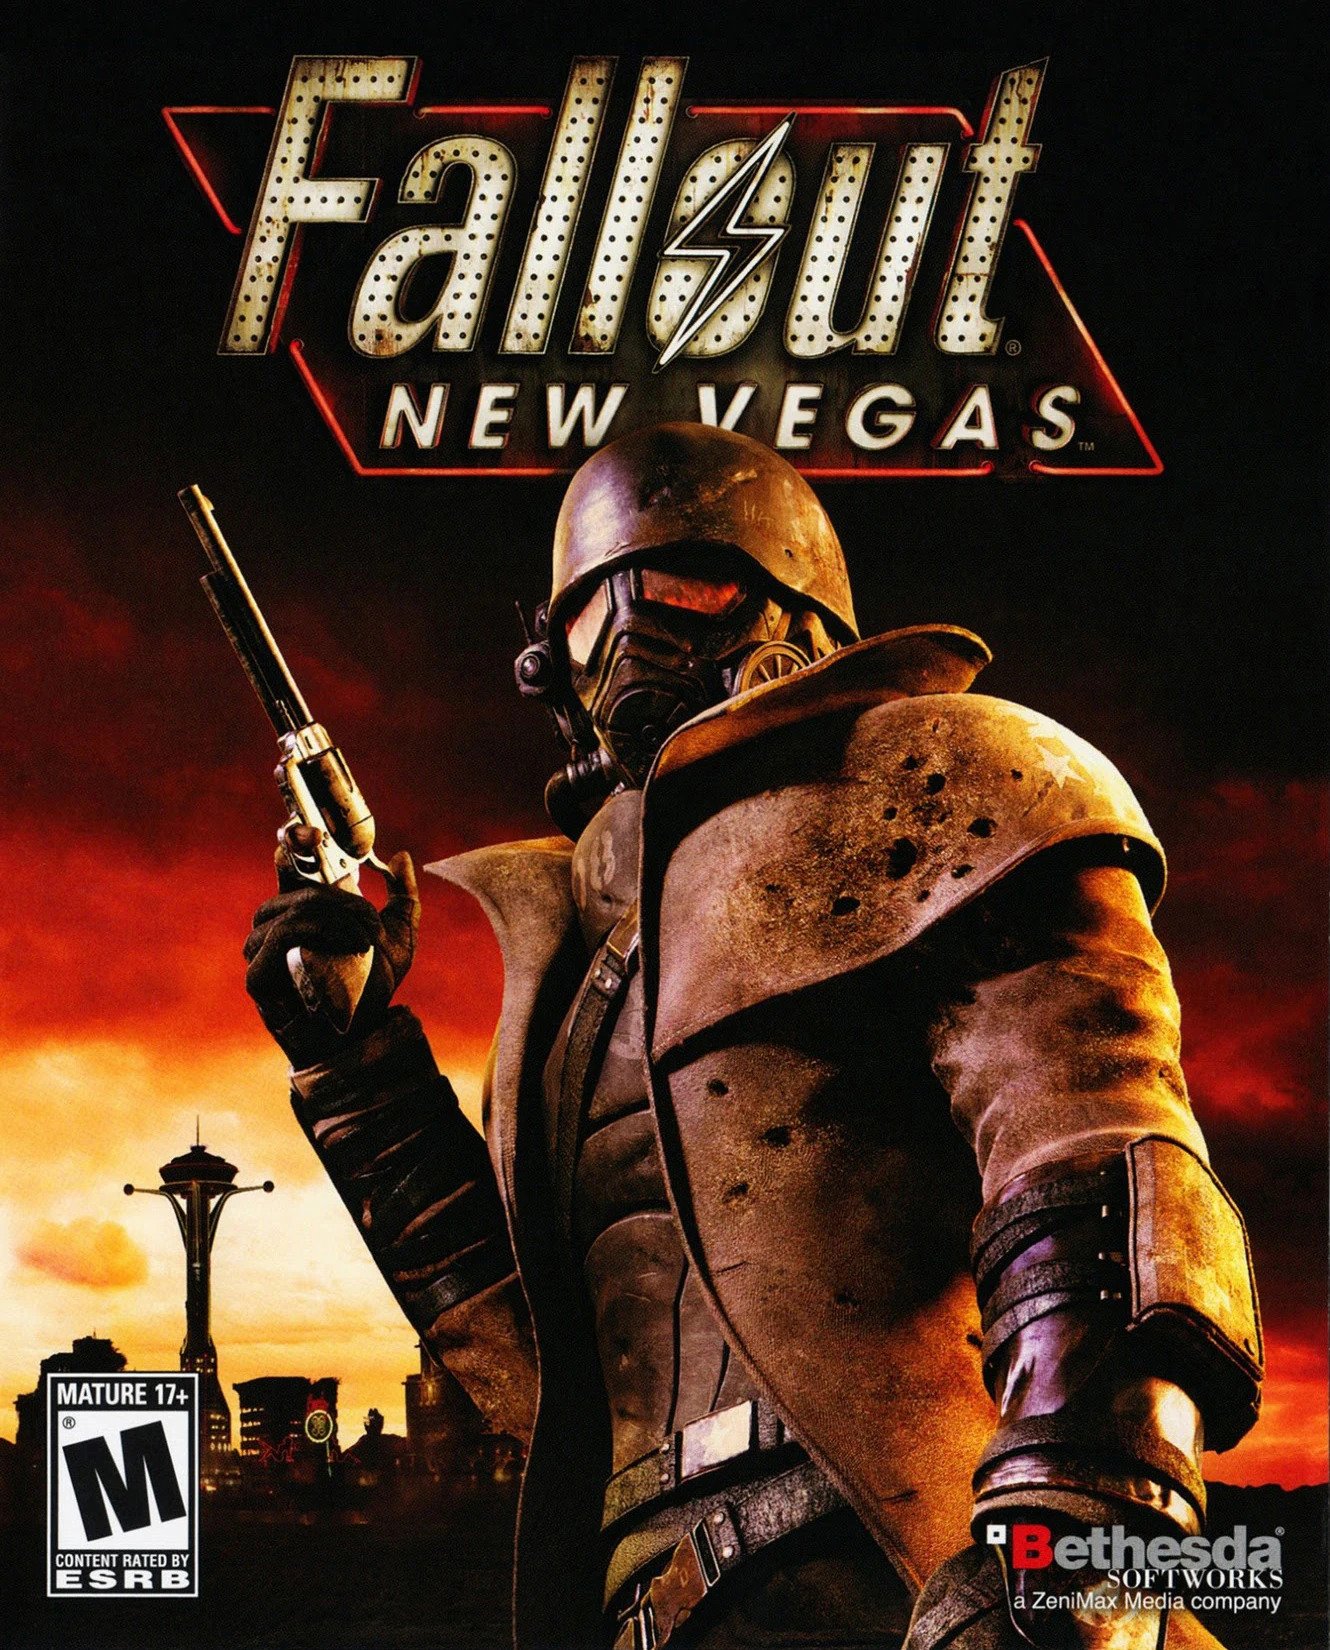 Fallout New Vegas mod instantly nukes NPCs wishing for a nuclear